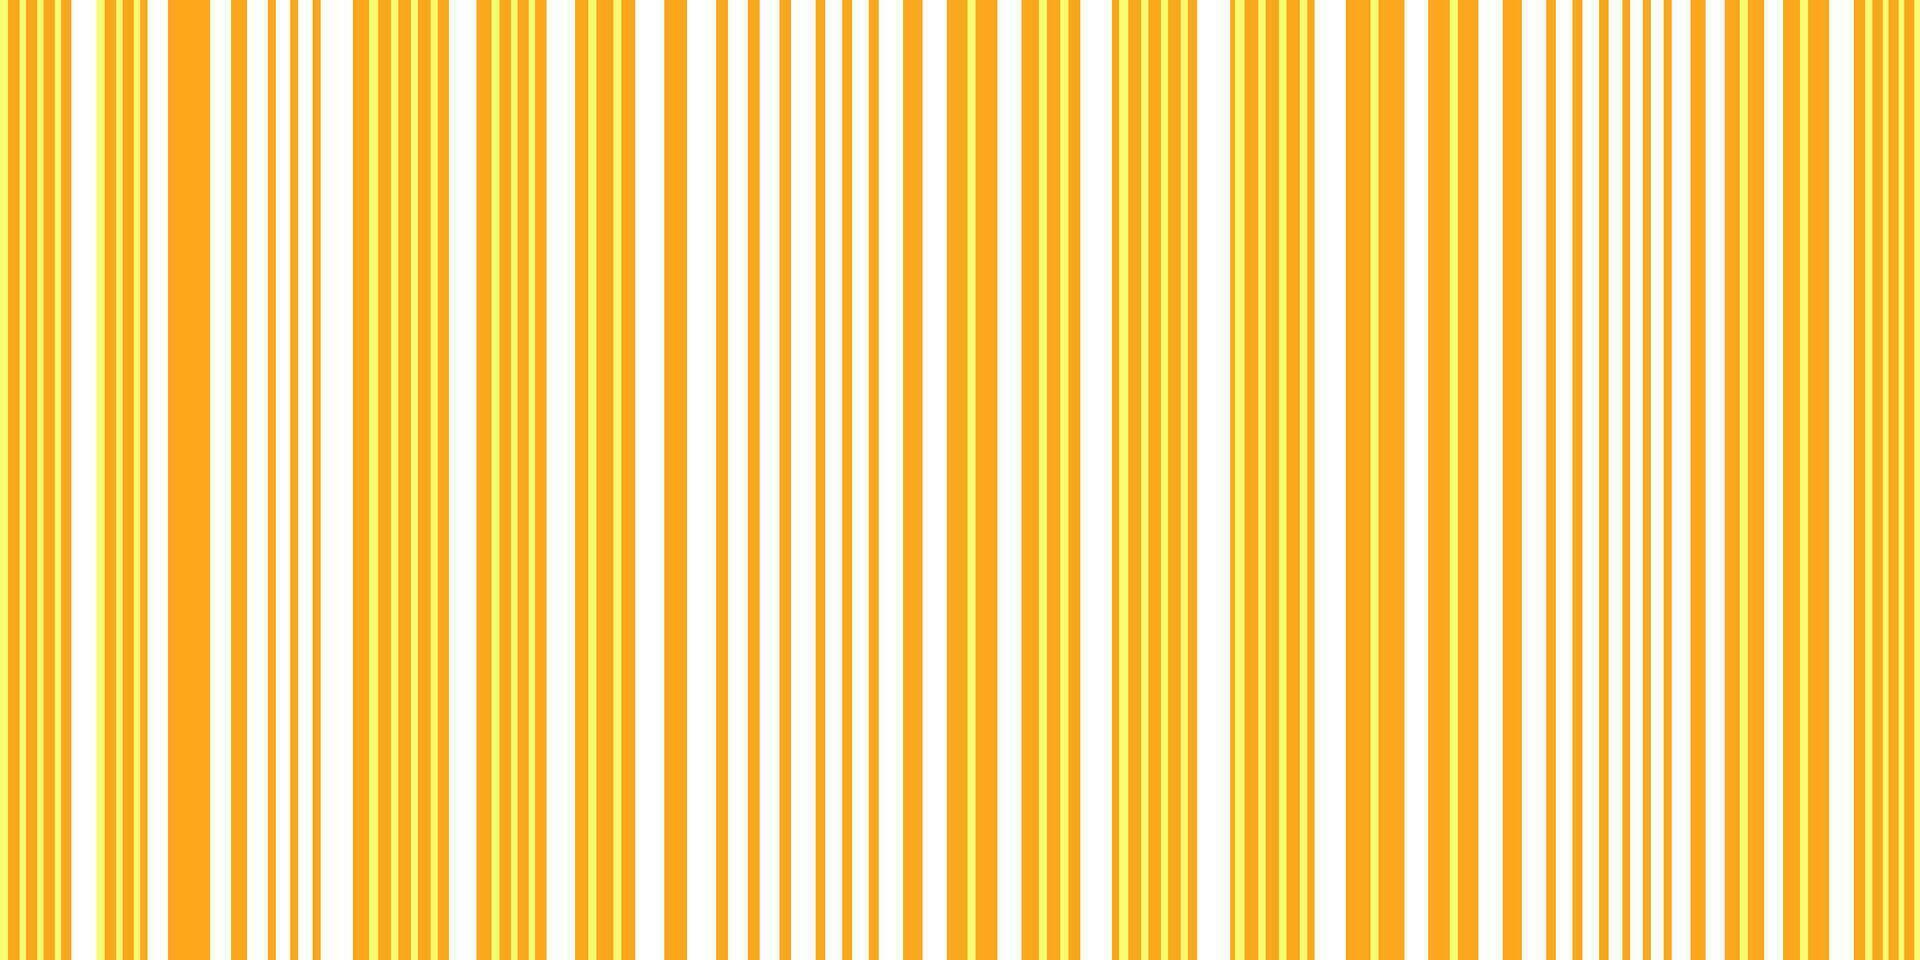 Colorful vertical stripes background texture vector